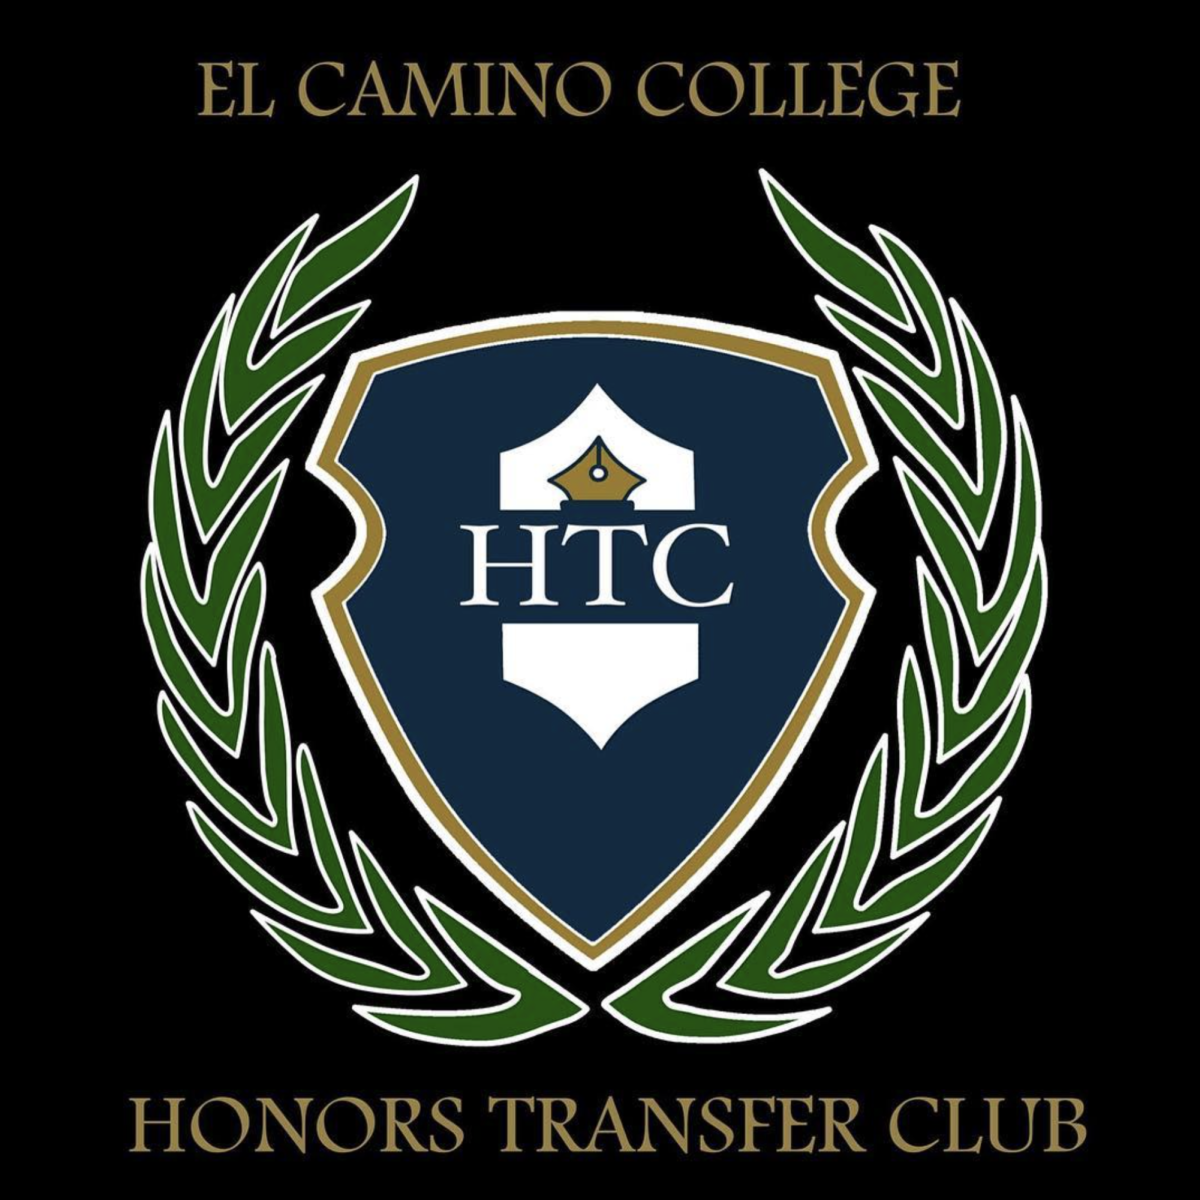 A screenshot of the Honors Transfer Club seal taken from the official Honors Transfer Club Instagram page.